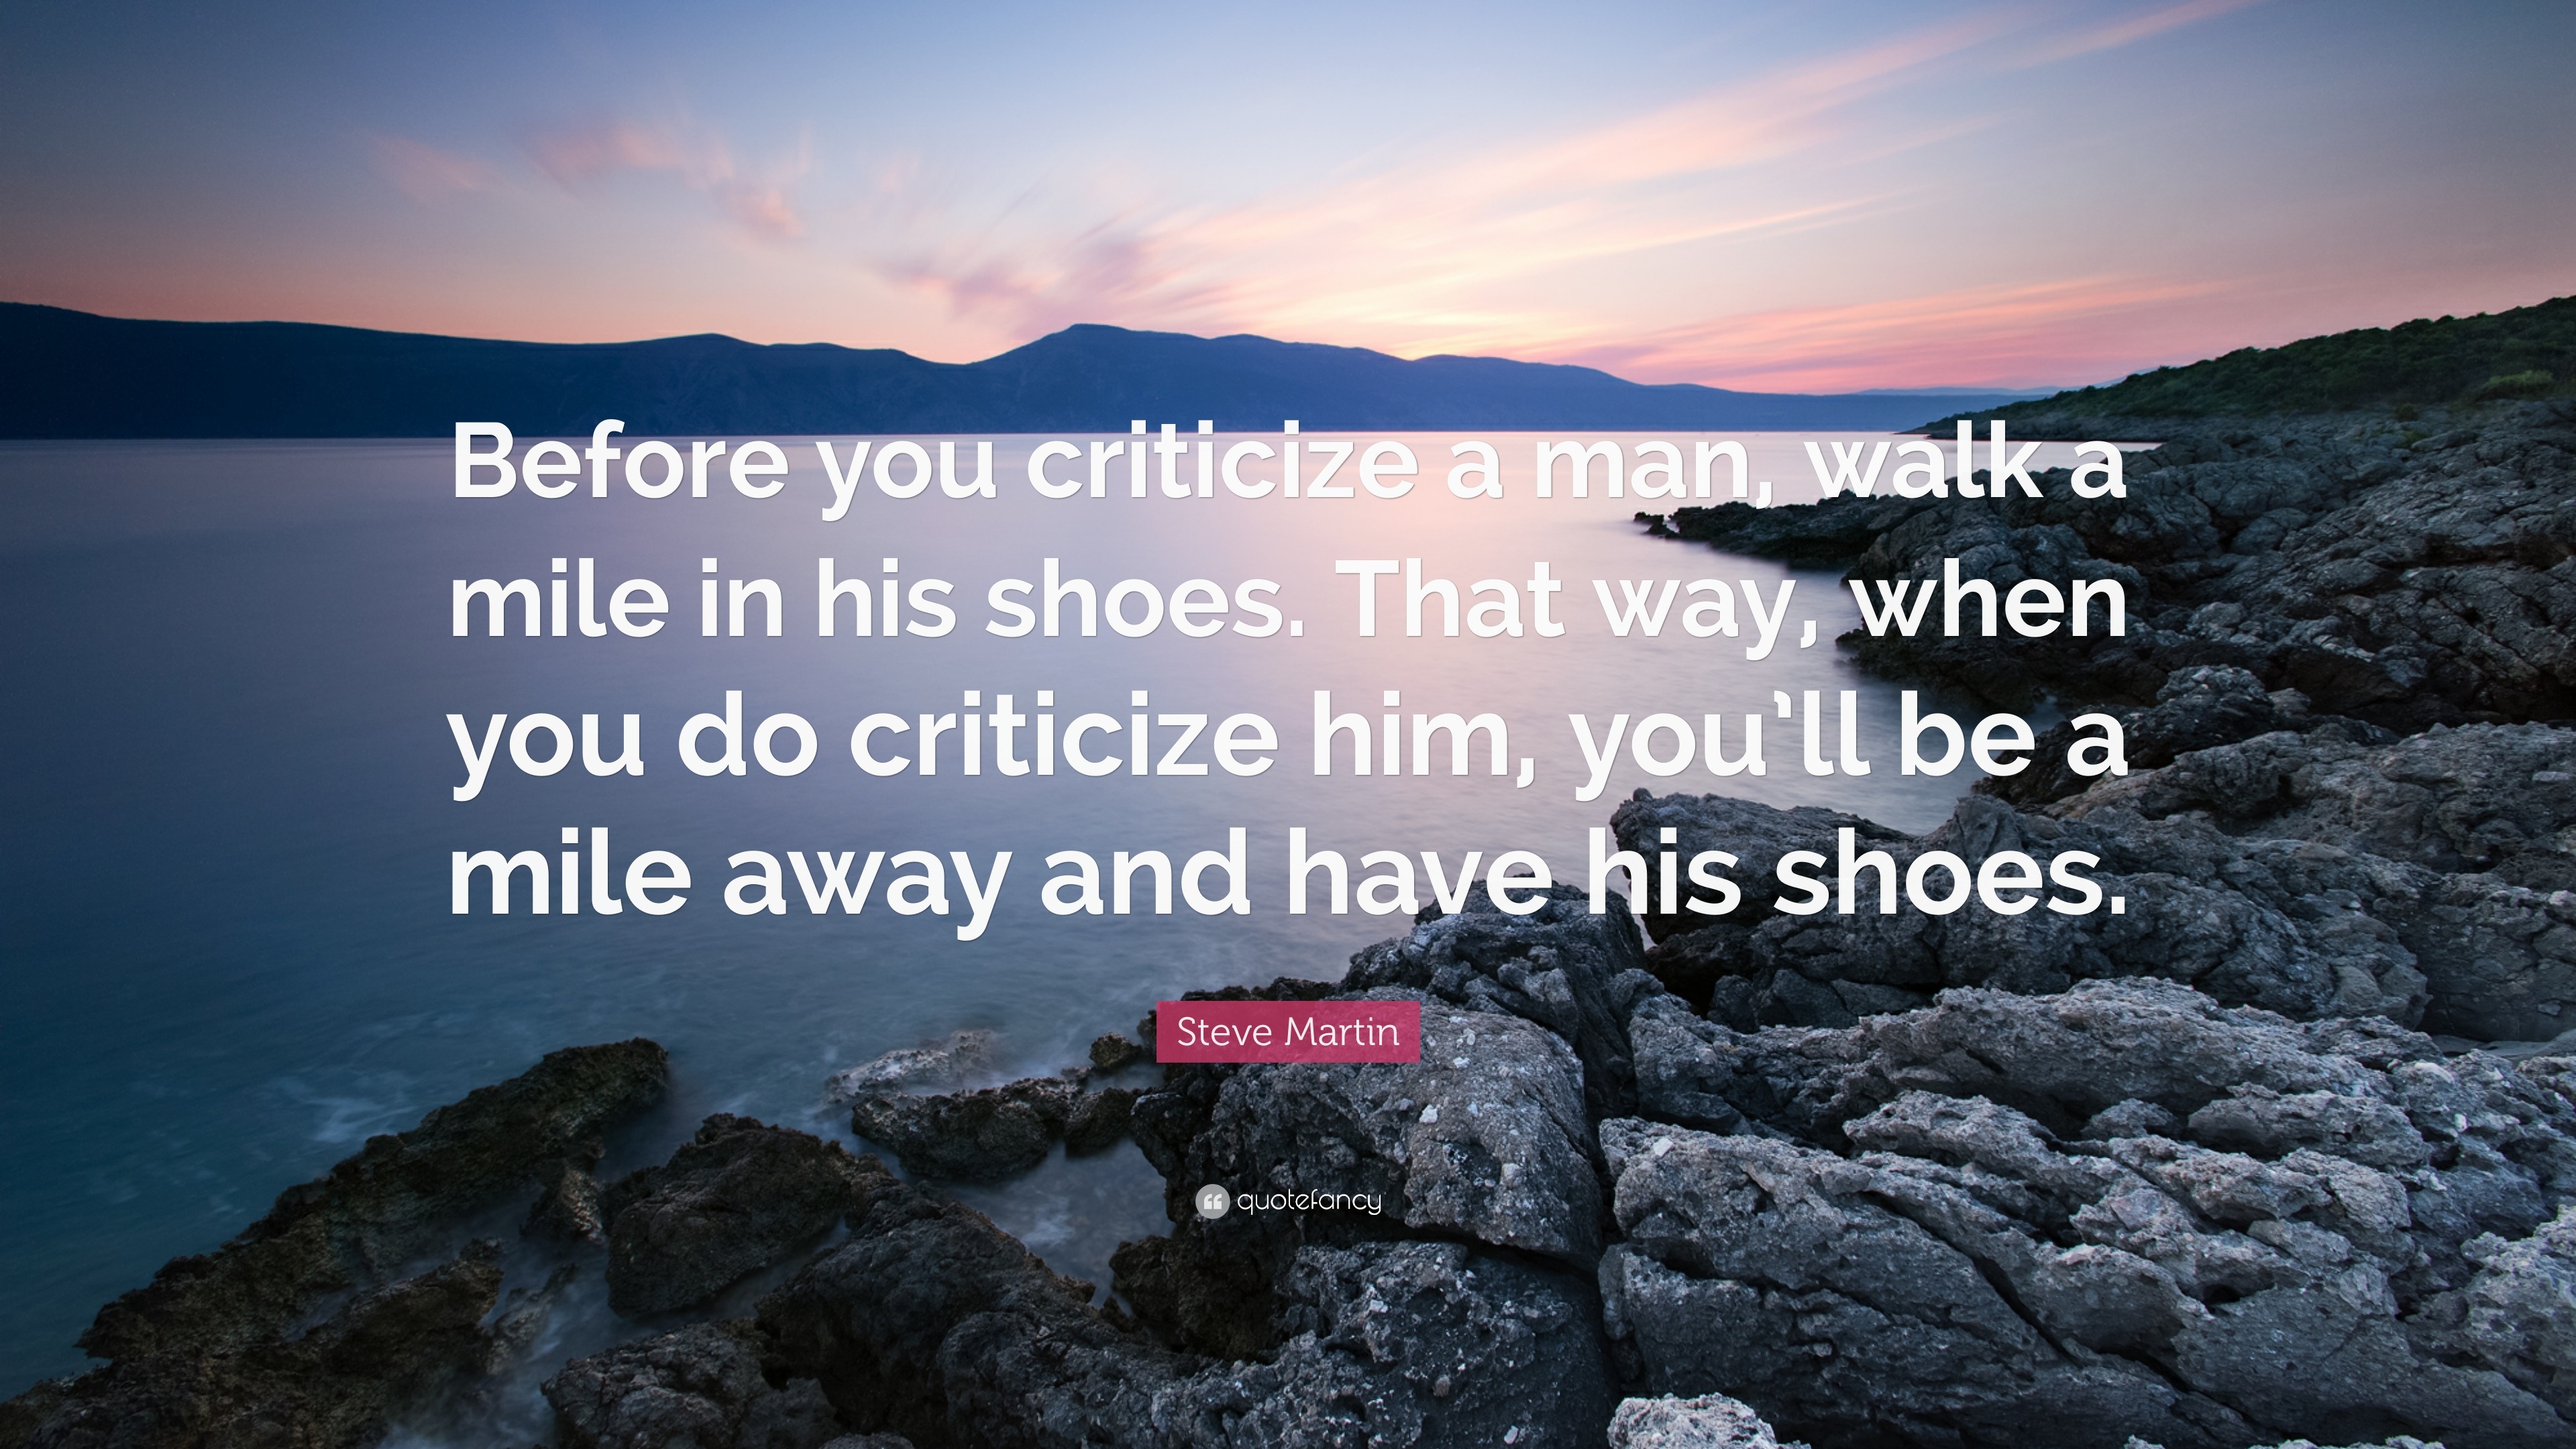 Steve Martin Quote: “Before you criticize a man, walk a mile in his ...